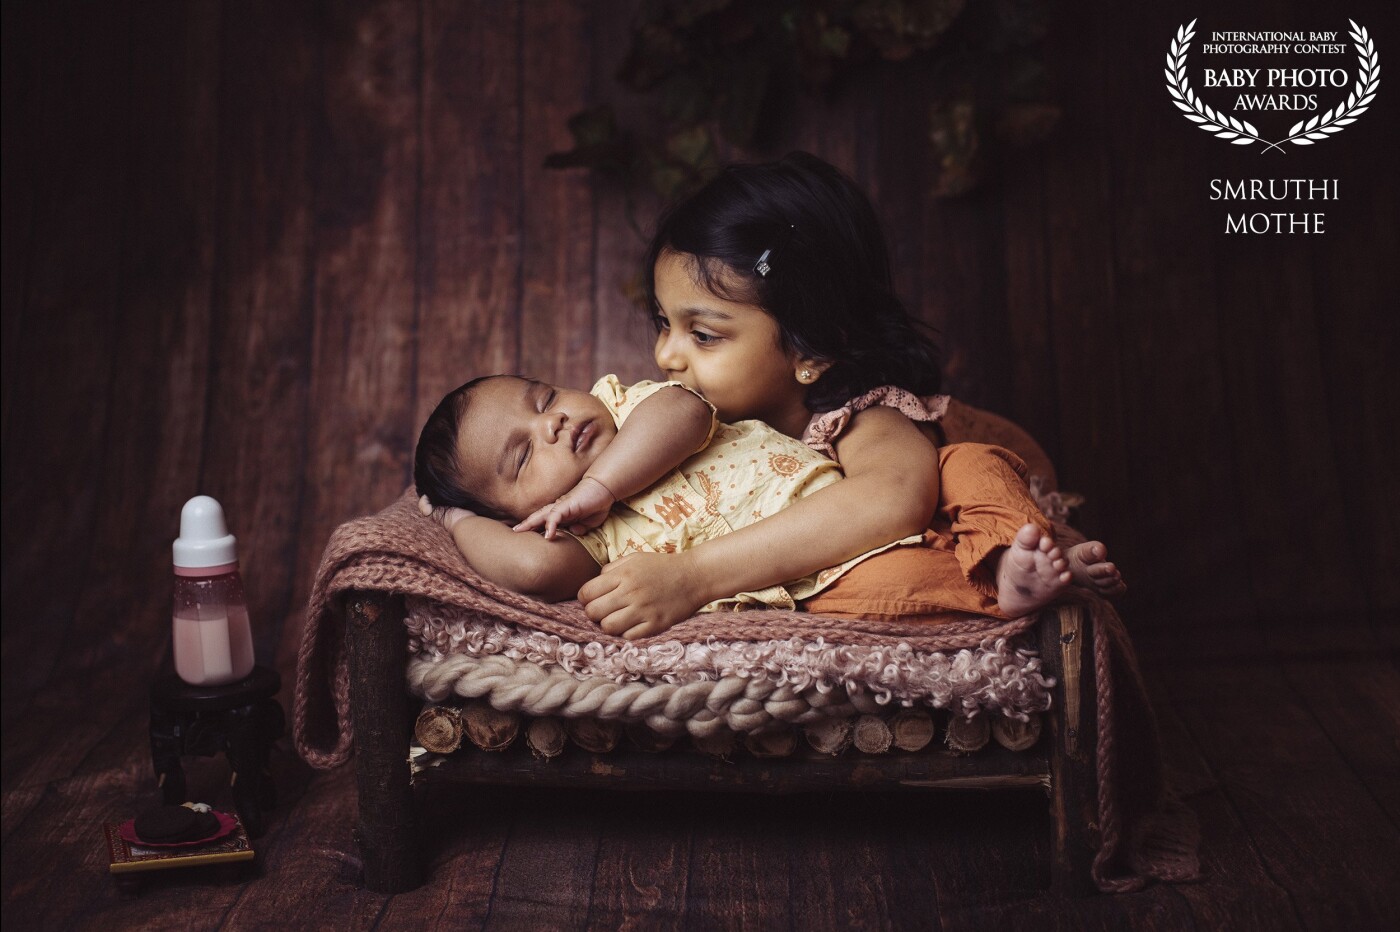 "Sisters and Brothers just happen, we don't get to choose them, but they become one of our most cherished relationships"<br />
It is so beautiful to see how this little girl became a BIG sister for her newborn little brother. 